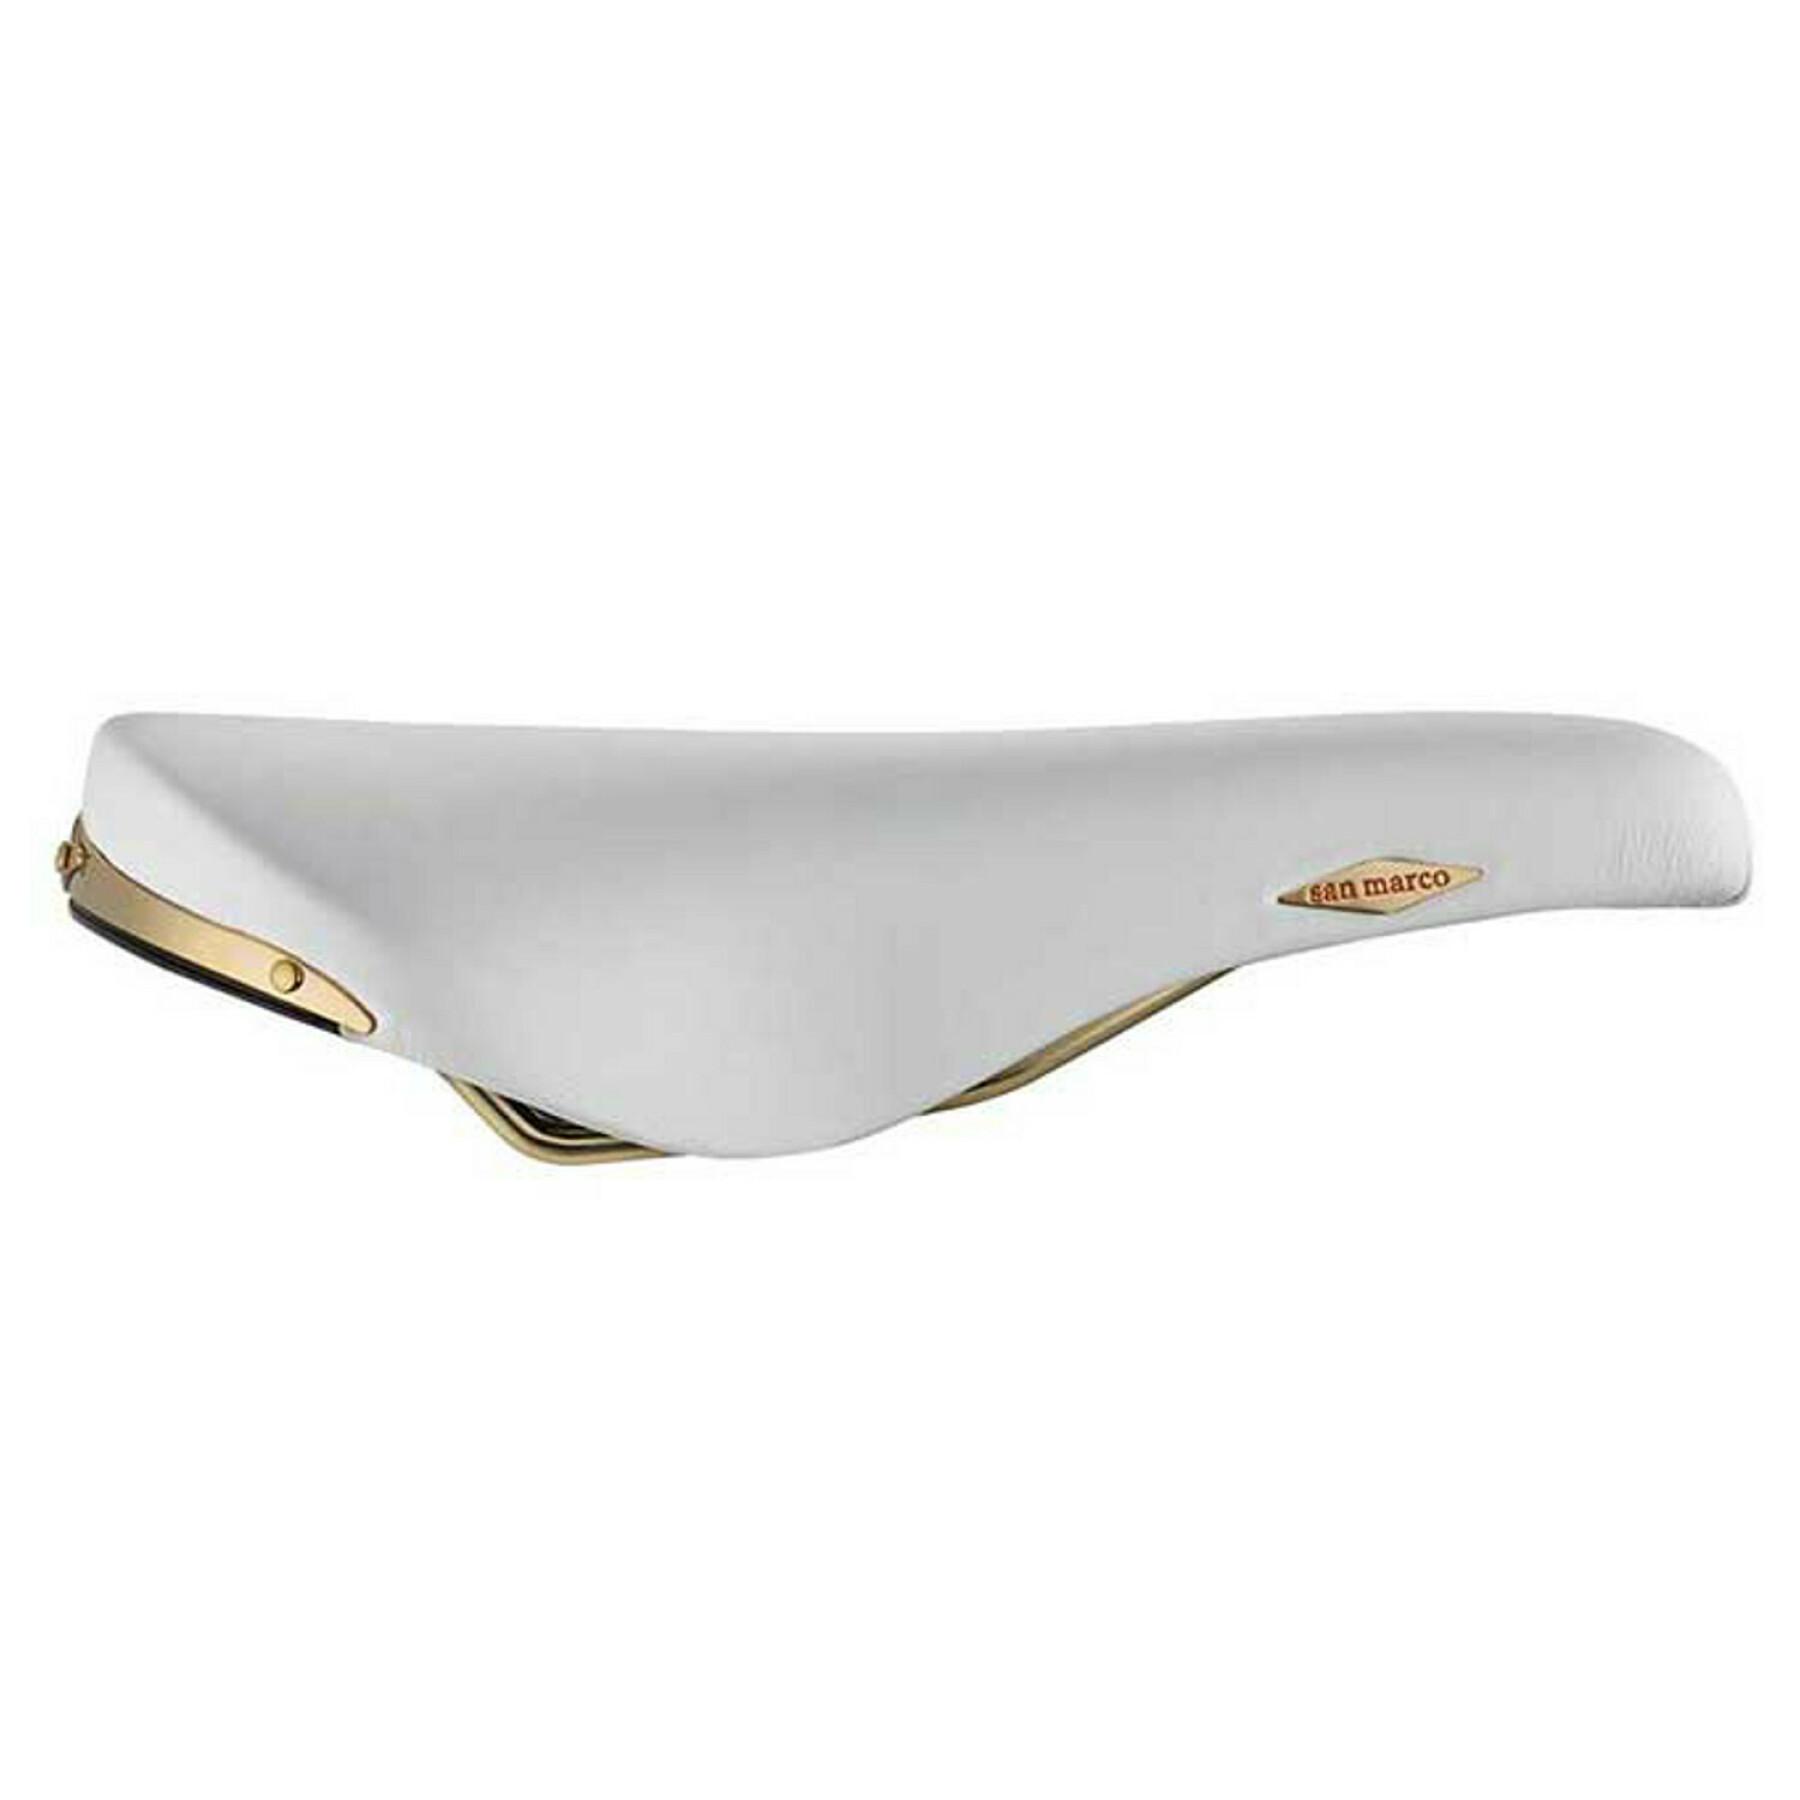 Sella Selle San Marco Rolls LE Bianche